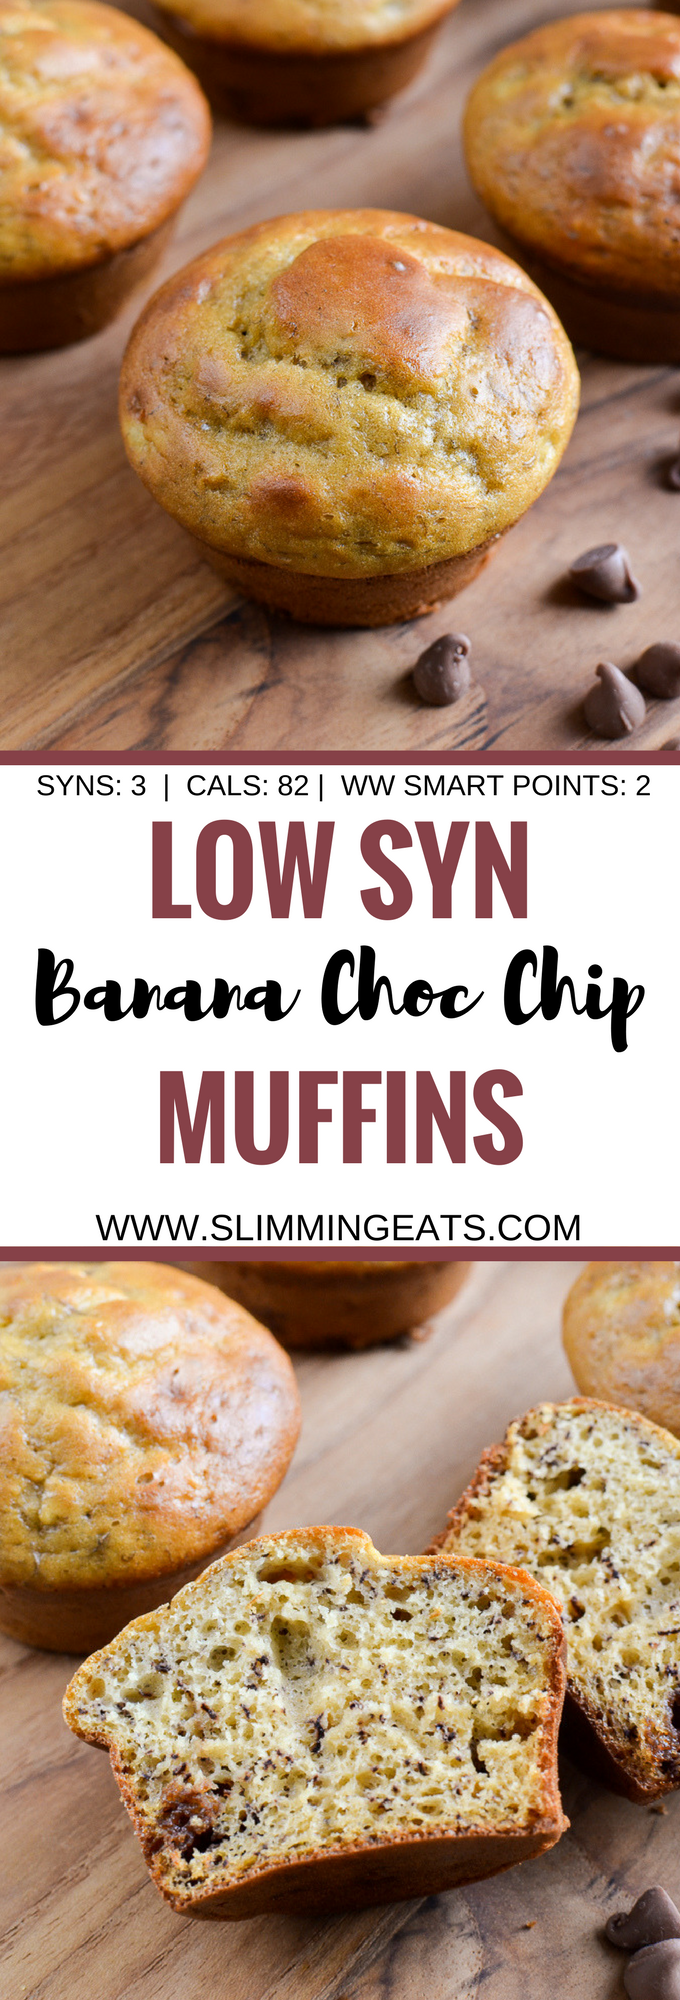 Slimming Eats Low Syn Banana Chocolate Chip Muffins - vegetarian, Slimming World and Weight Watchers friendly